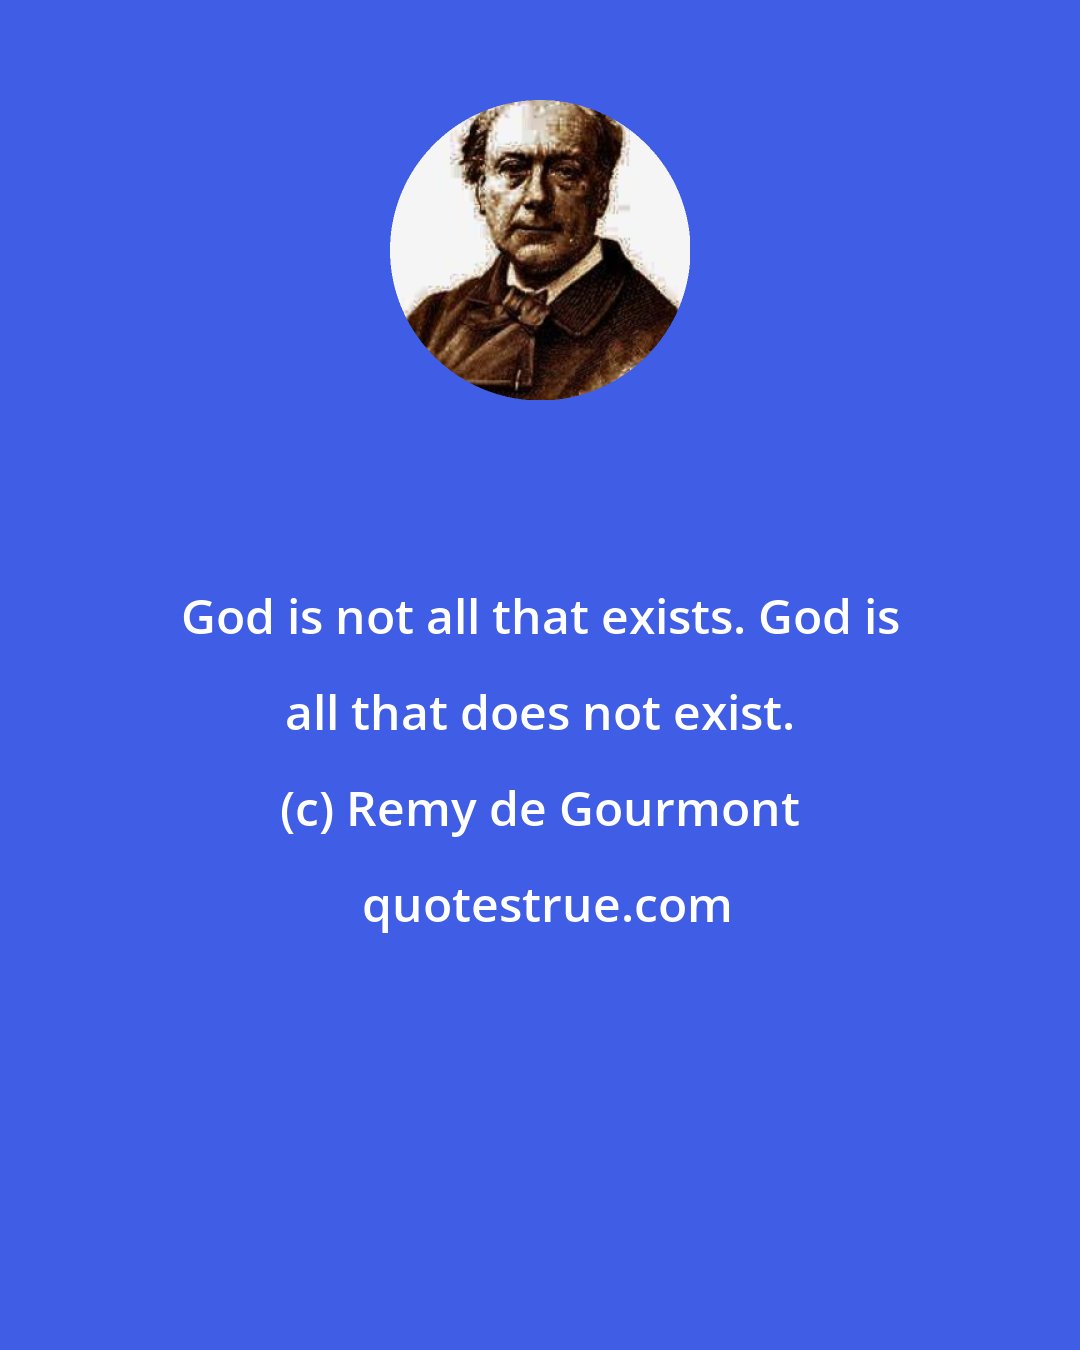 Remy de Gourmont: God is not all that exists. God is all that does not exist.